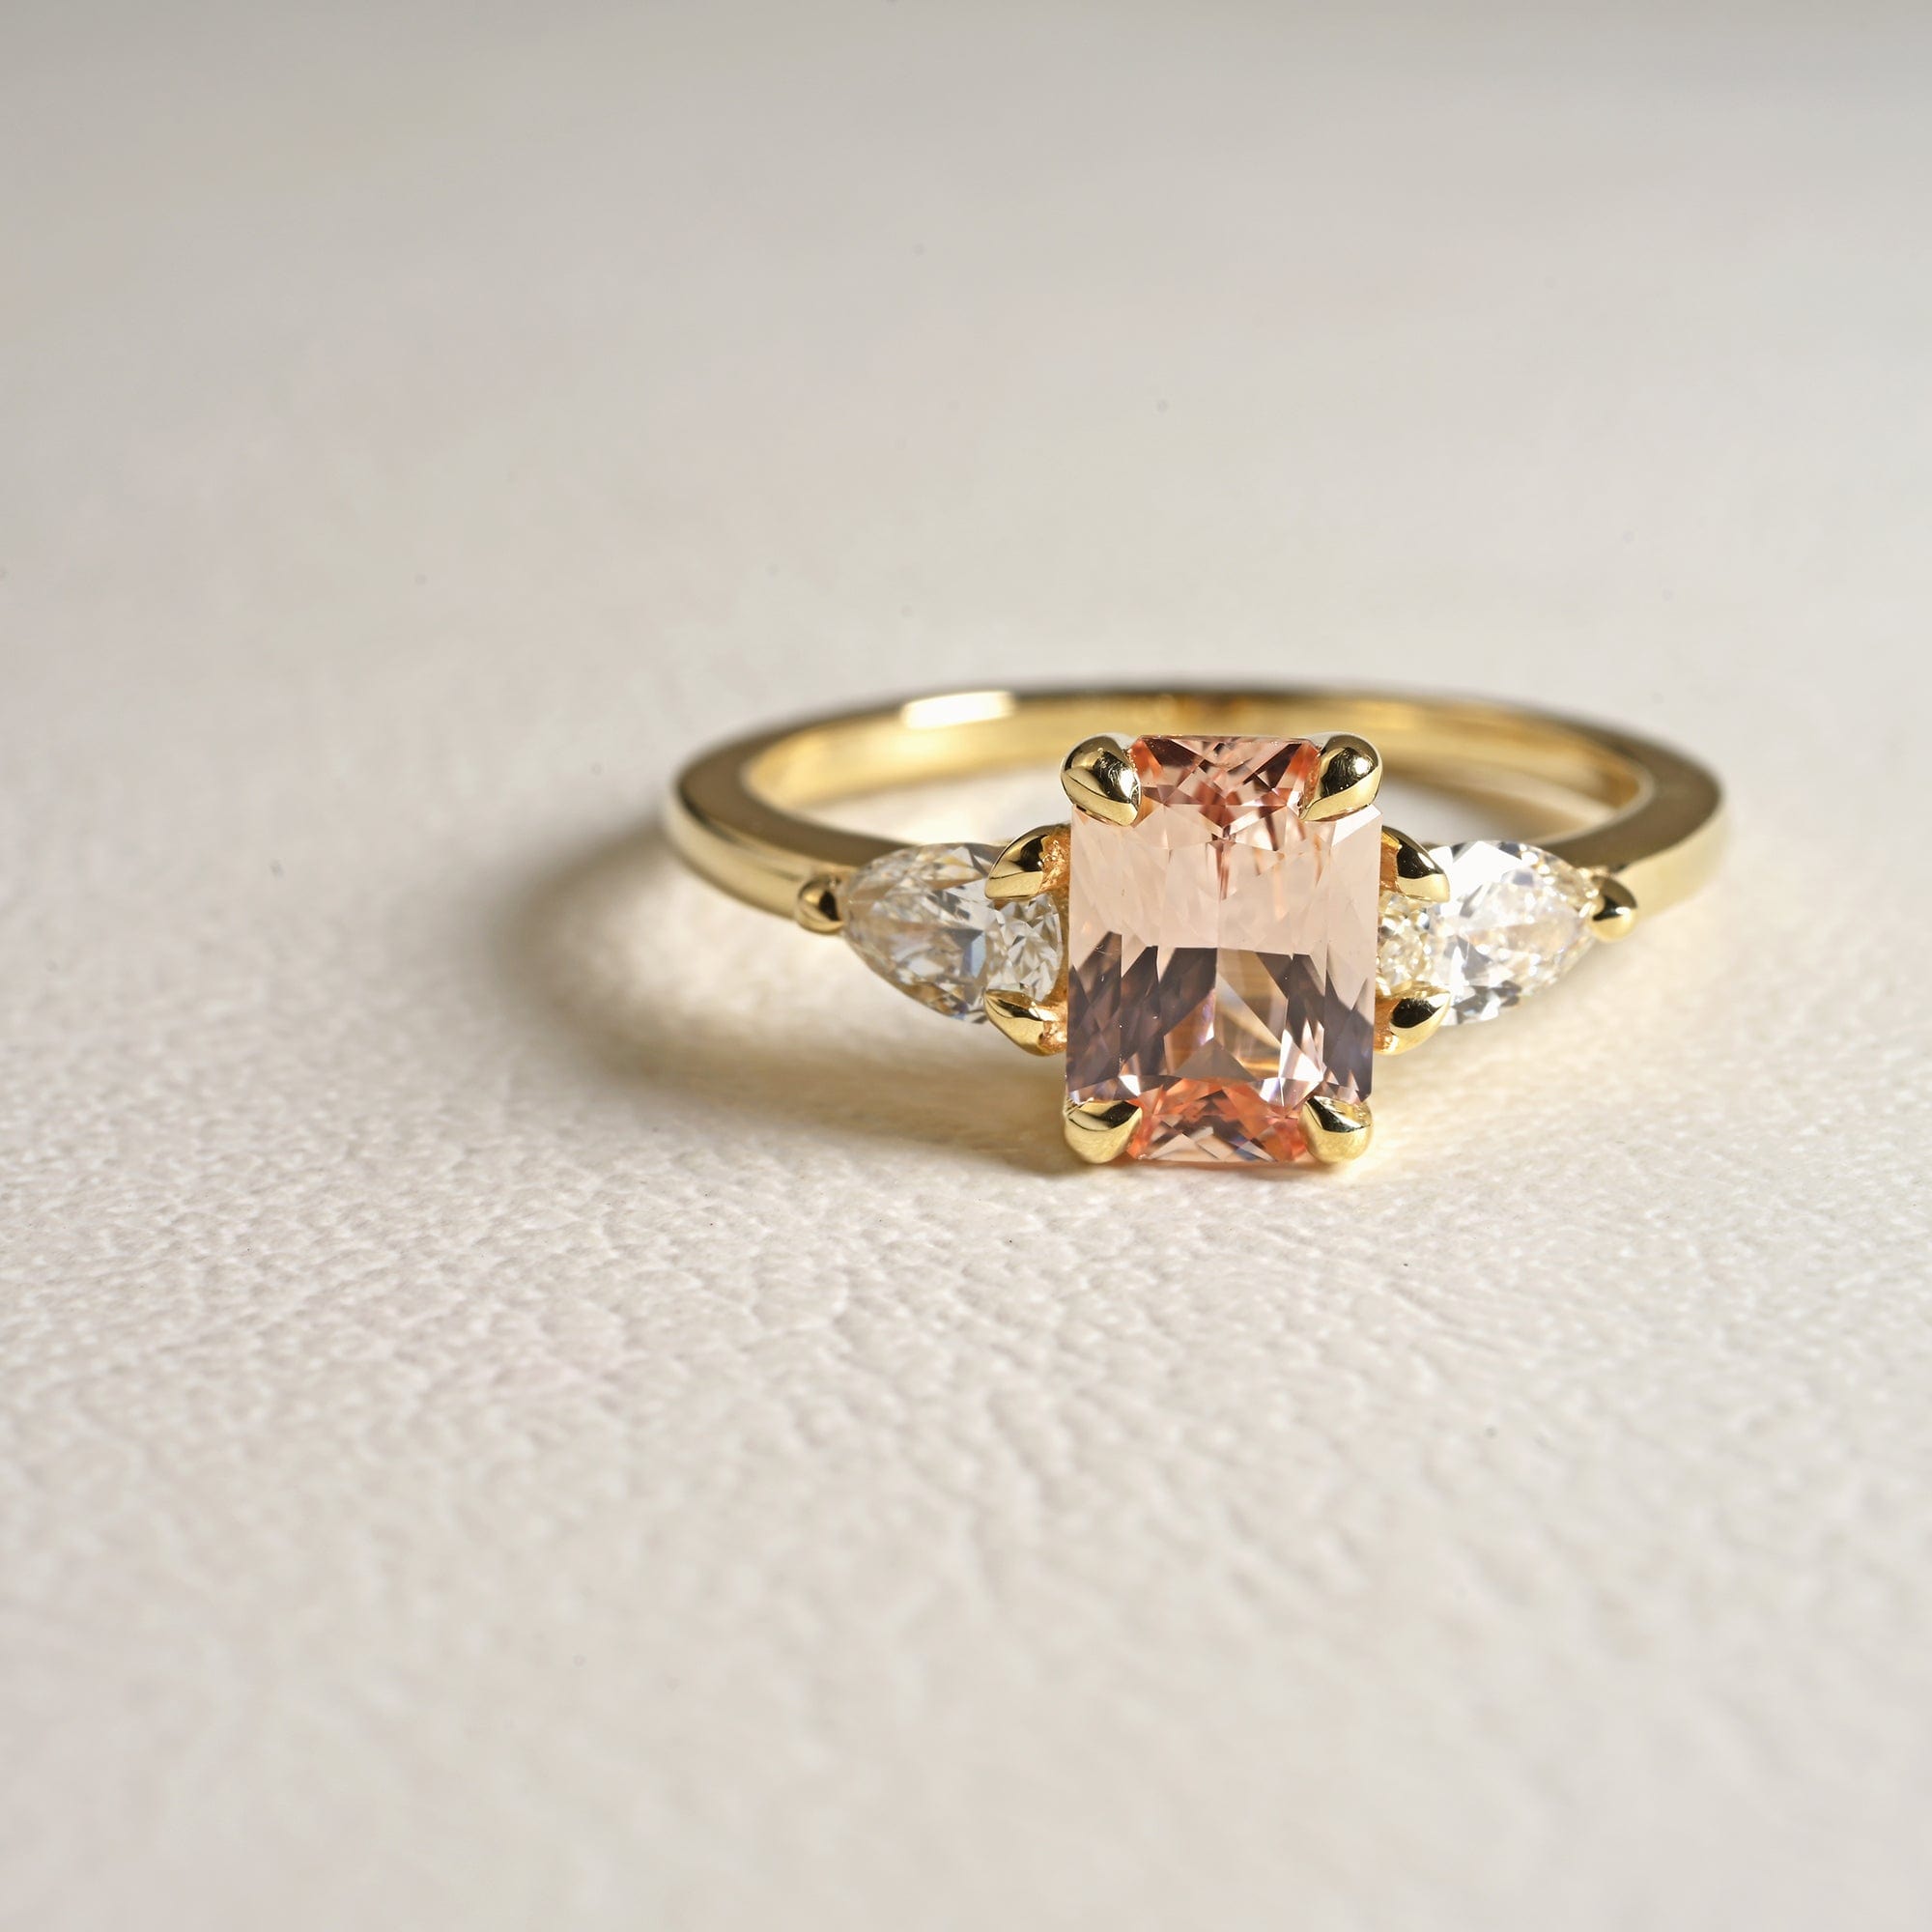 14k yellow gold three stone engagement ring, peach radiant cut sapphire with pear diamond sides